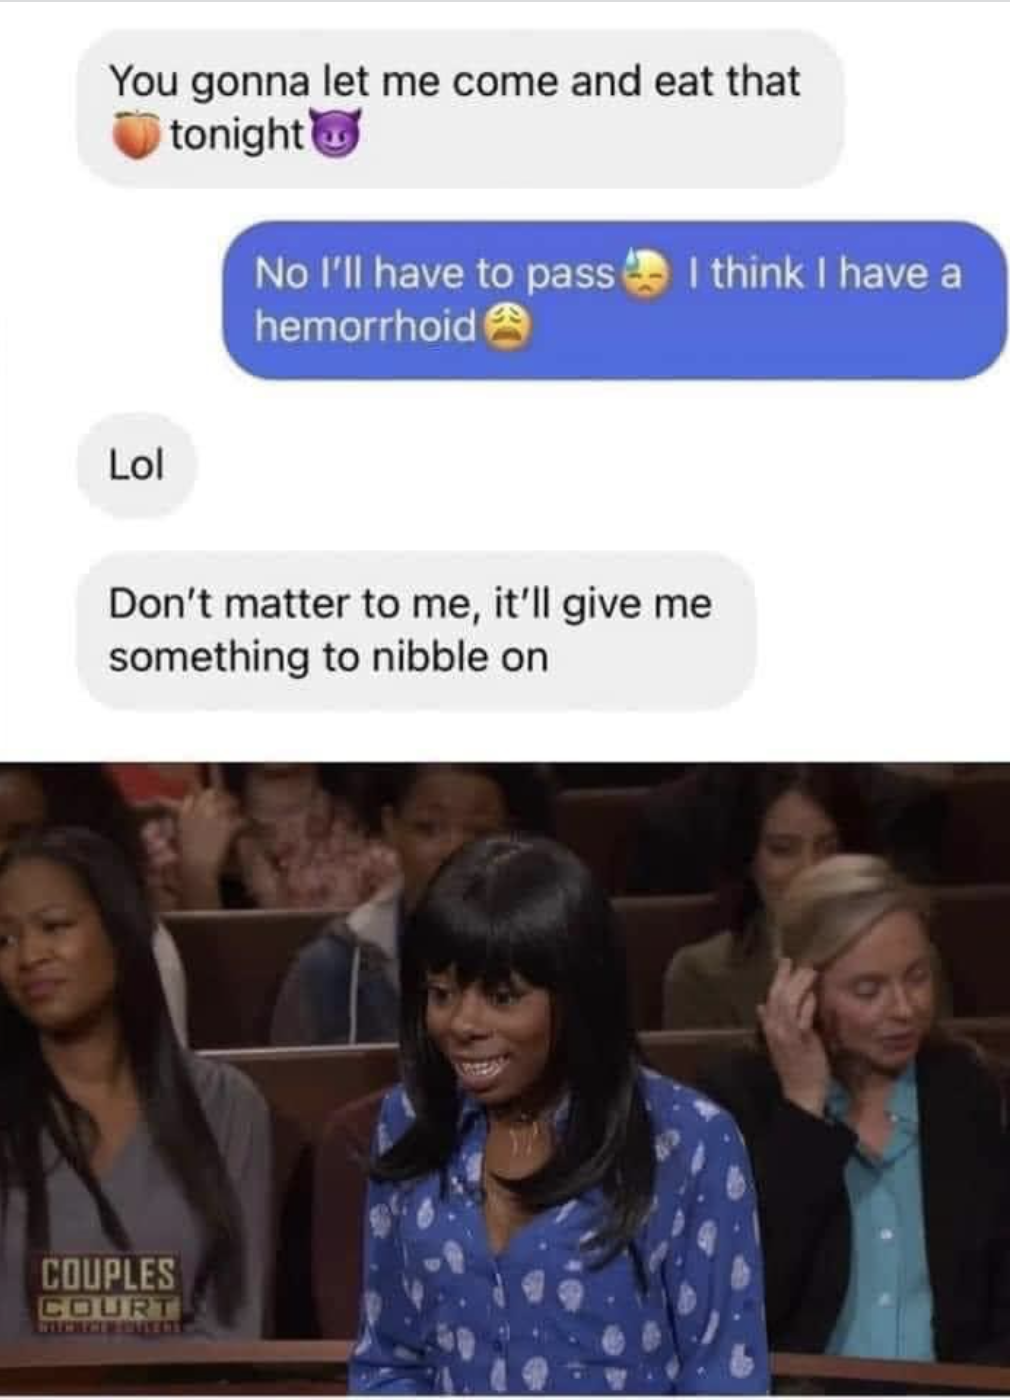 A screenshot of a text thread where someone says they can&#x27;t have sex because they have a hemorrhoid and the other person replying with &quot;that&#x27;ll give me something to nibble on&quot;